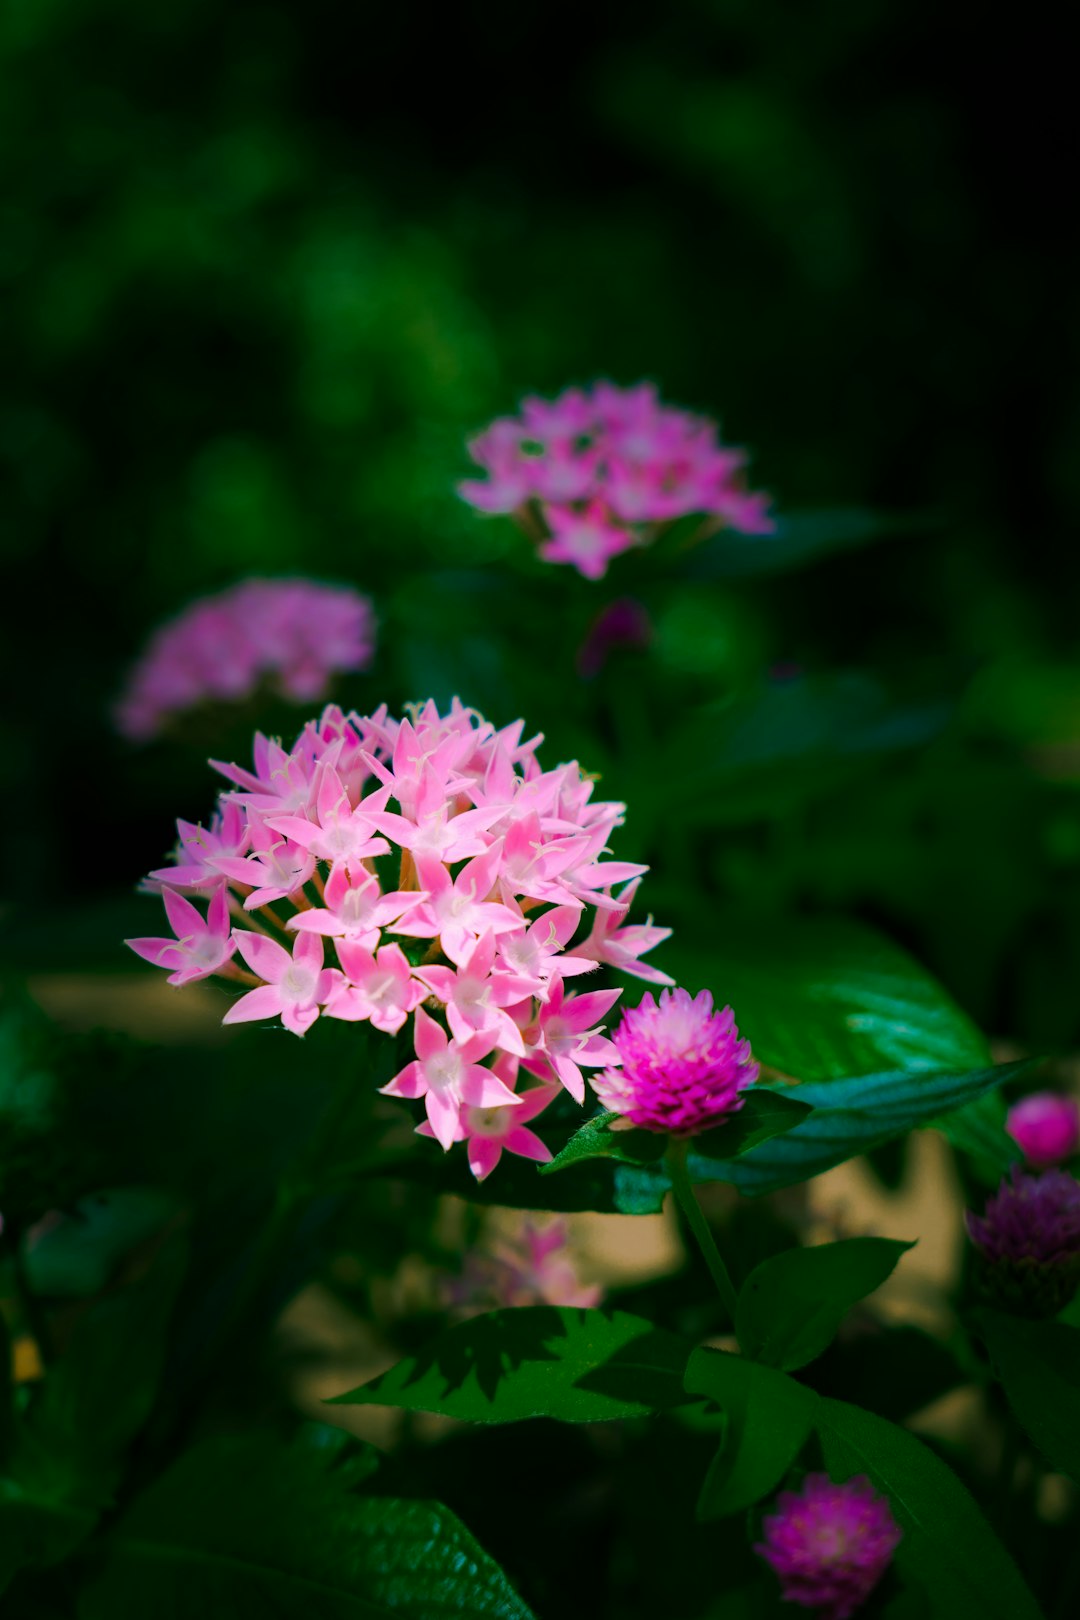 water ivory coast, flowerbed, pink and white flower in tilt shift lens